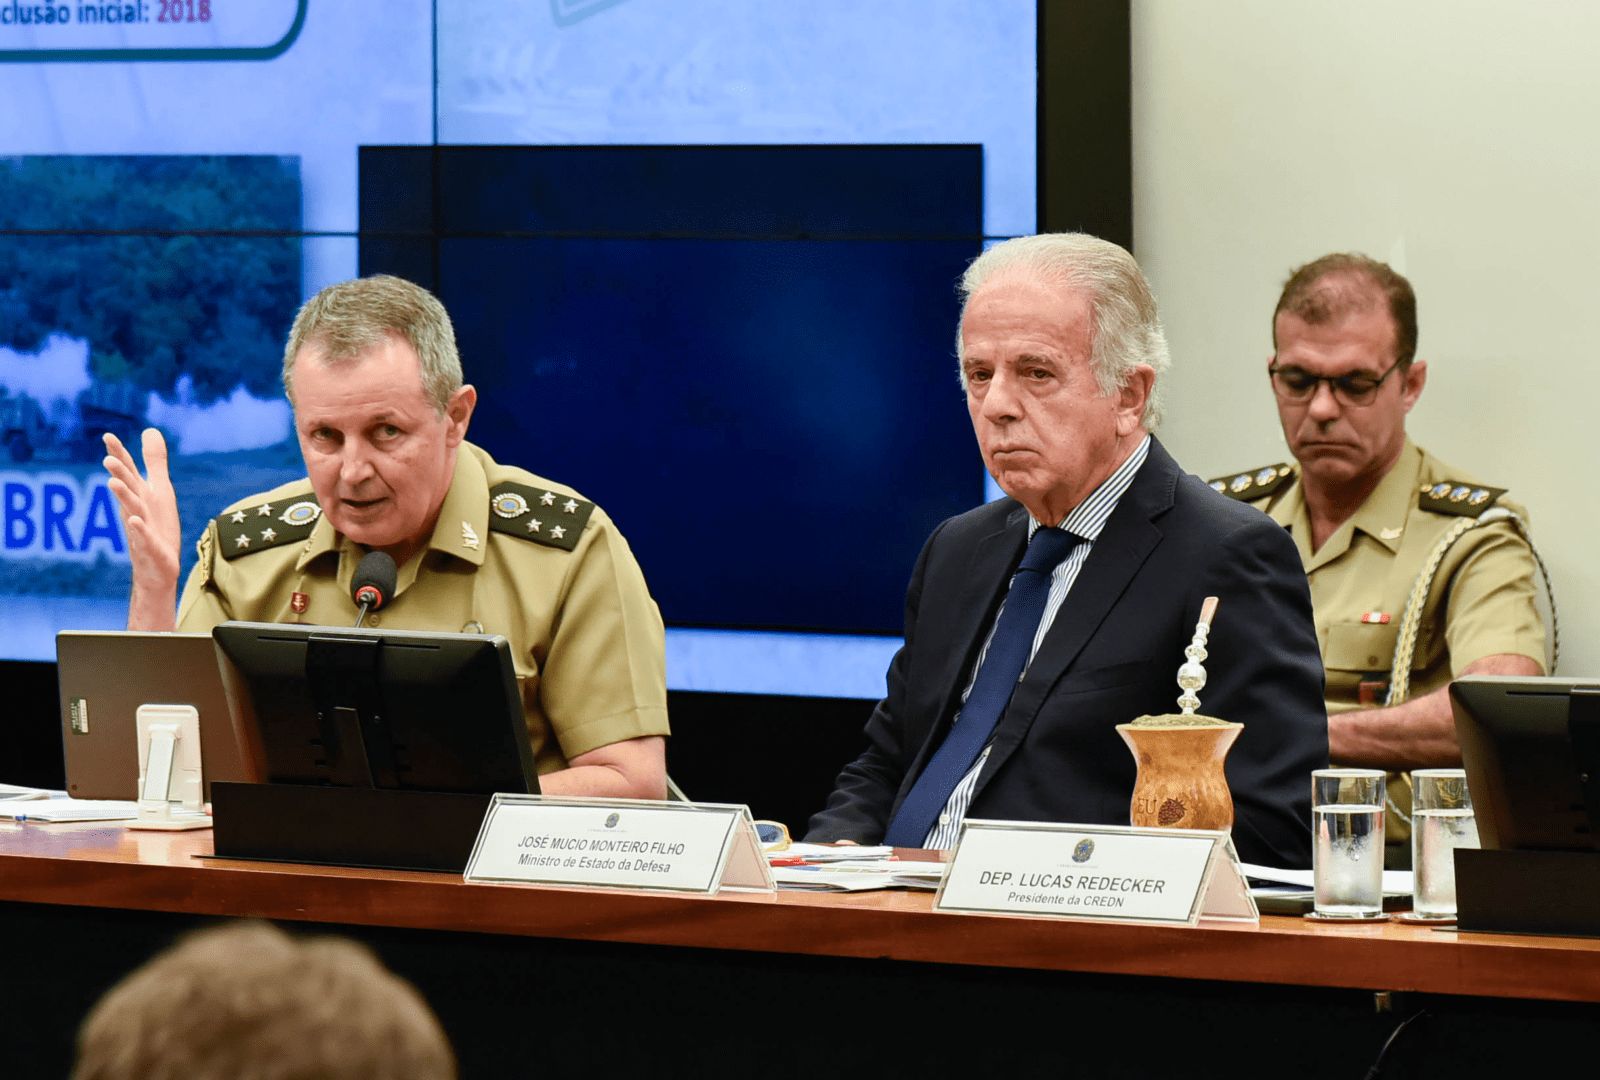 Commander of the Brazilian Army presents the Army's challenges and achievements to the Chamber's National Defense Committee